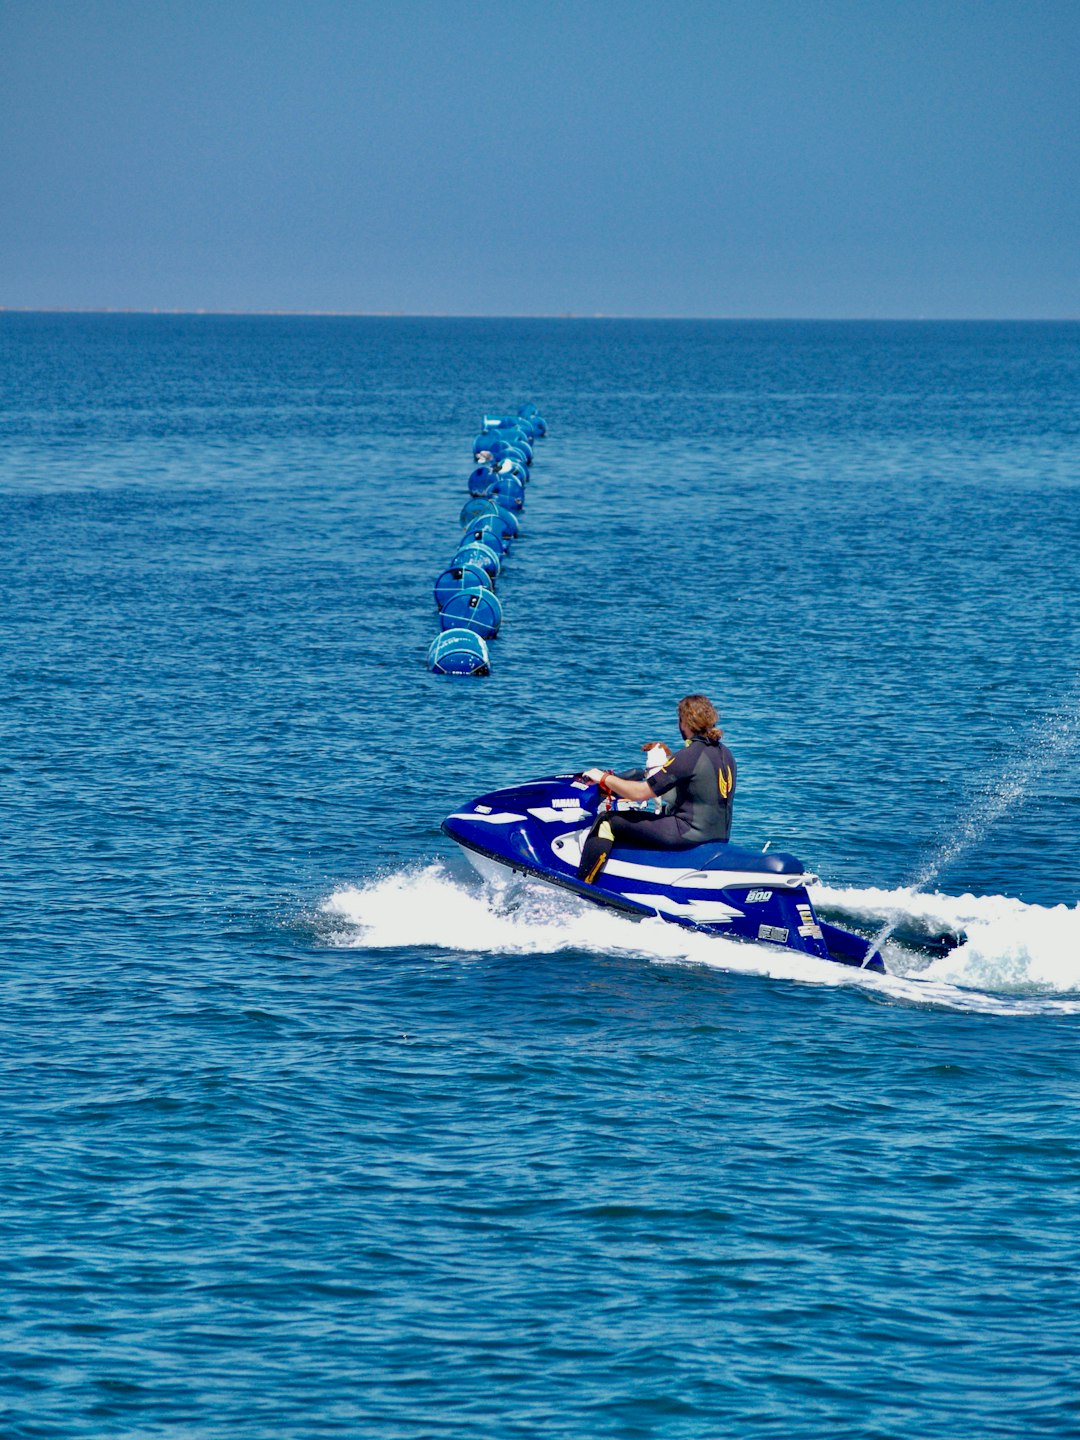 woman in blue and white wetsuit riding white and purple inflatable raft on blue sea during